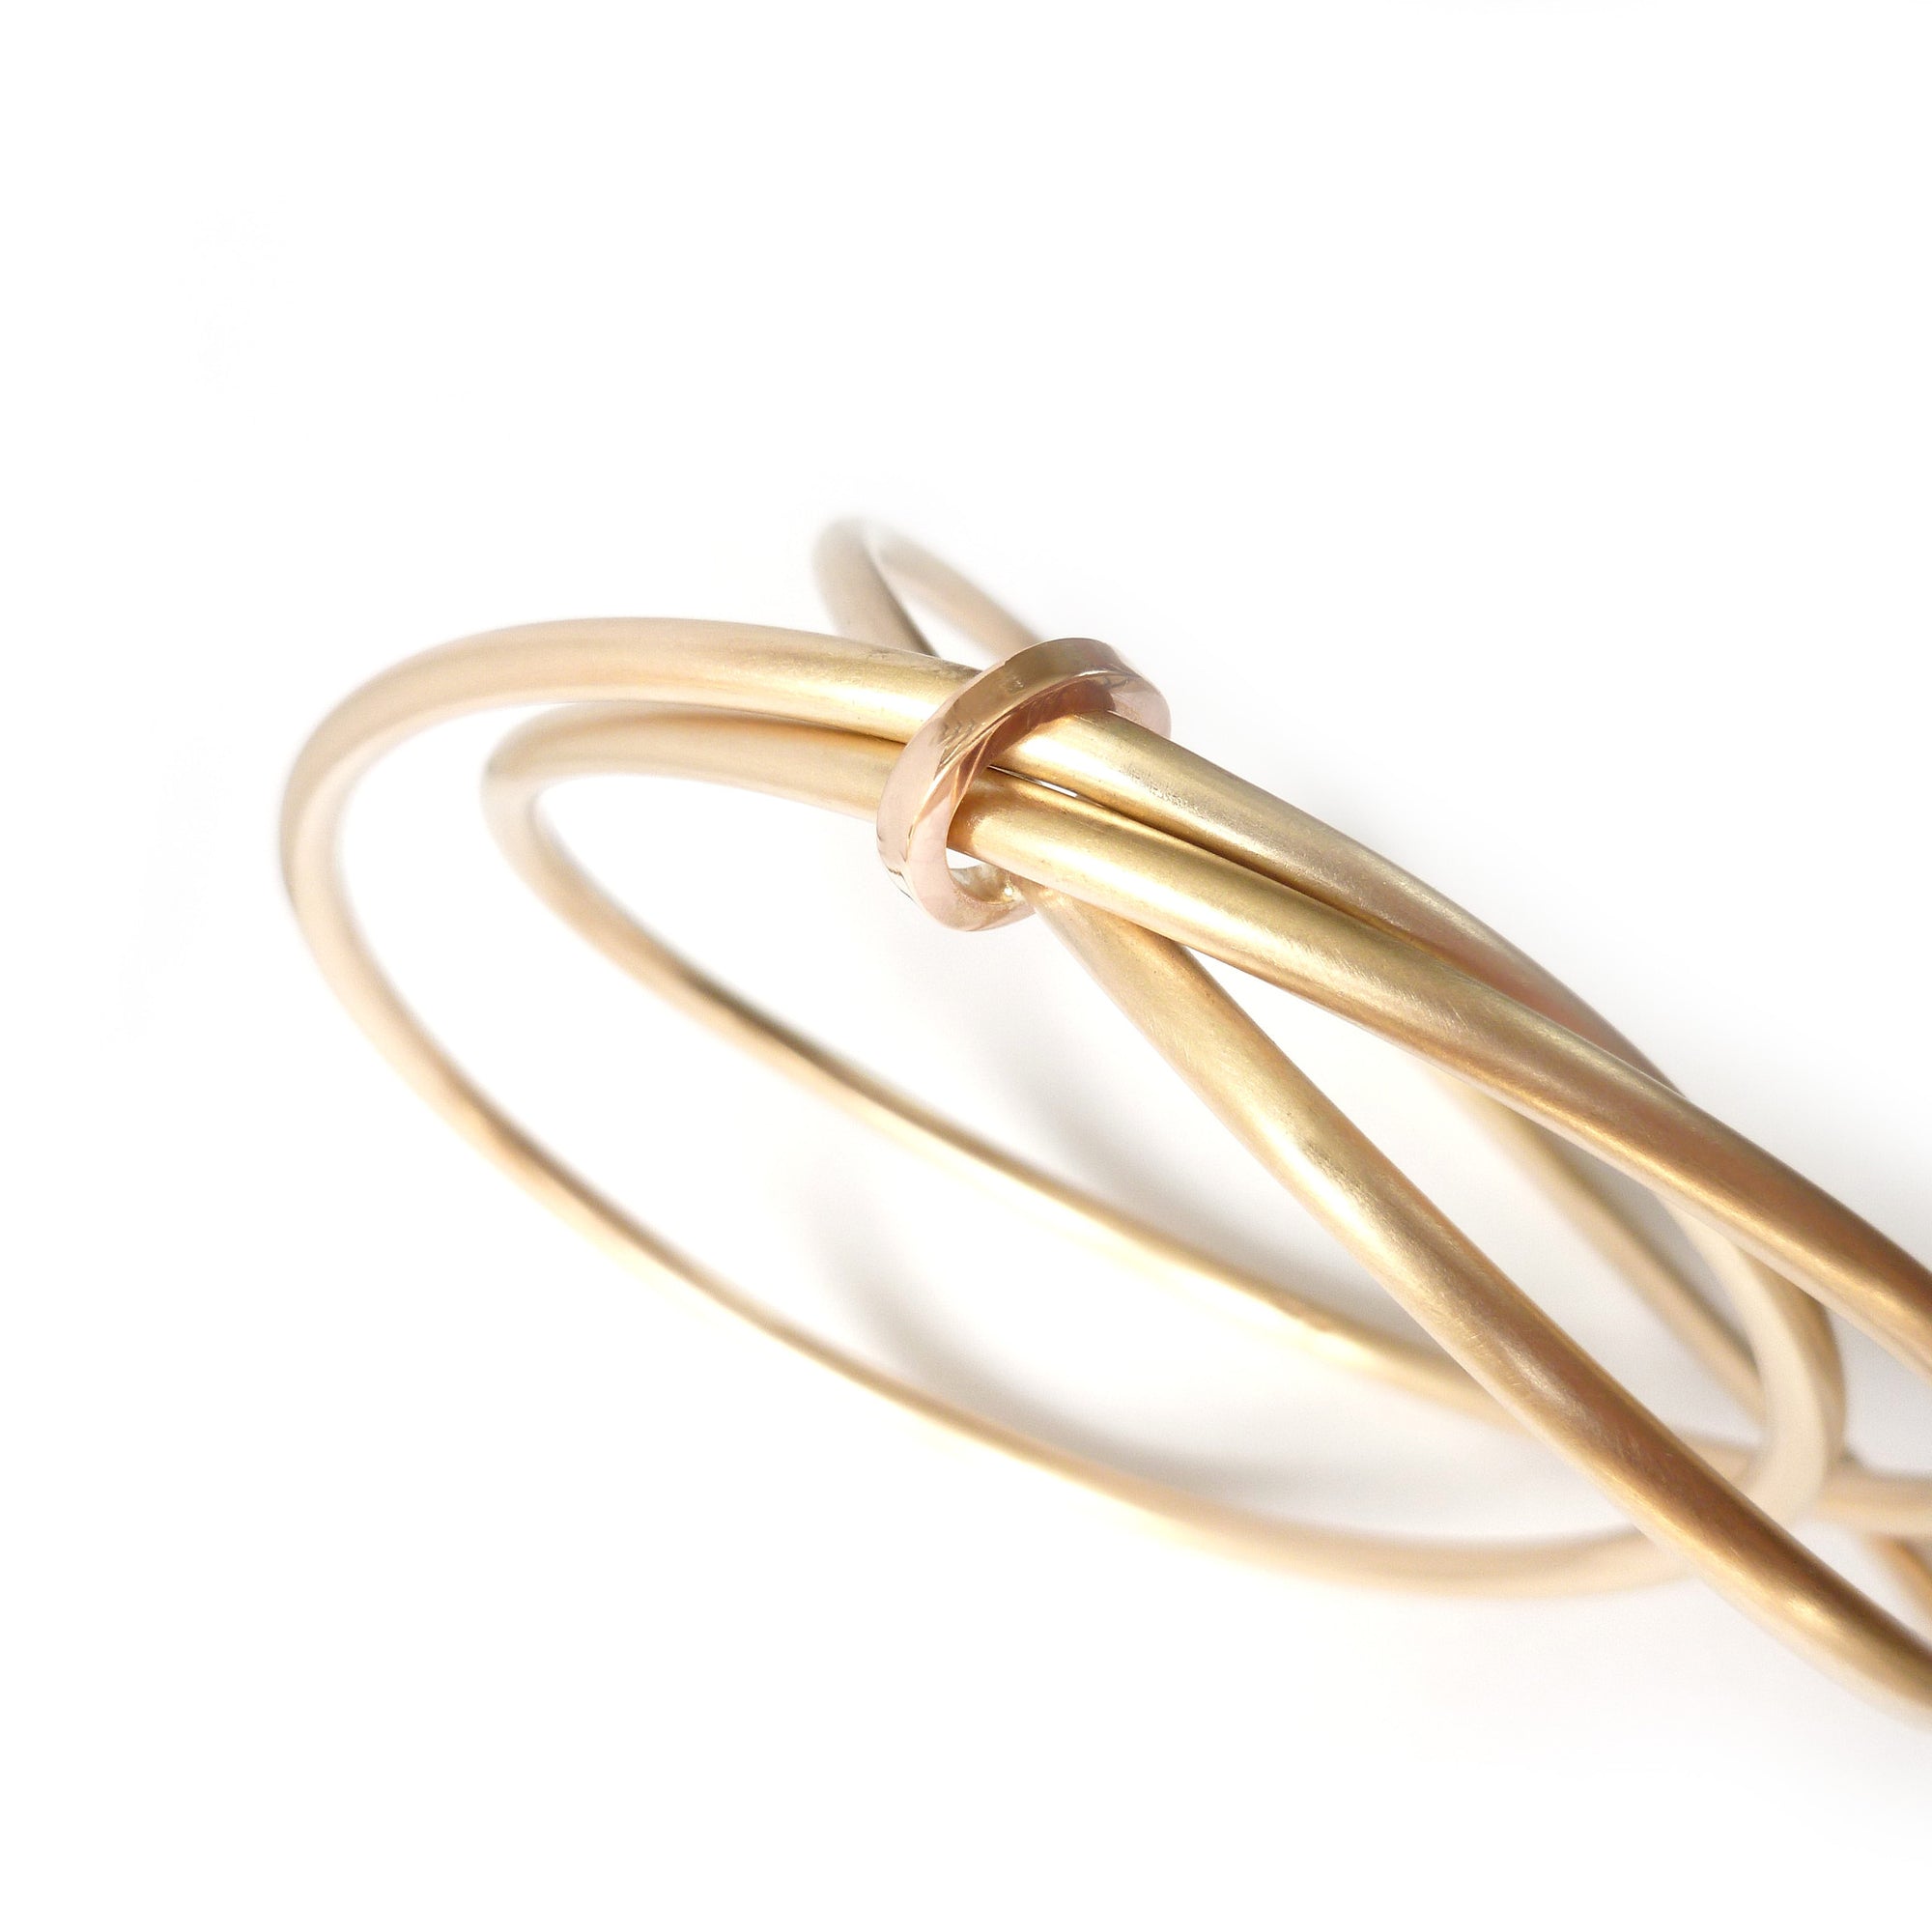 Unusual, unique, bespoke and modern gold Russian style bangle with brushed finish. Handmade by Sue Lane Contempoary Jewellery in Herefordshire, UK